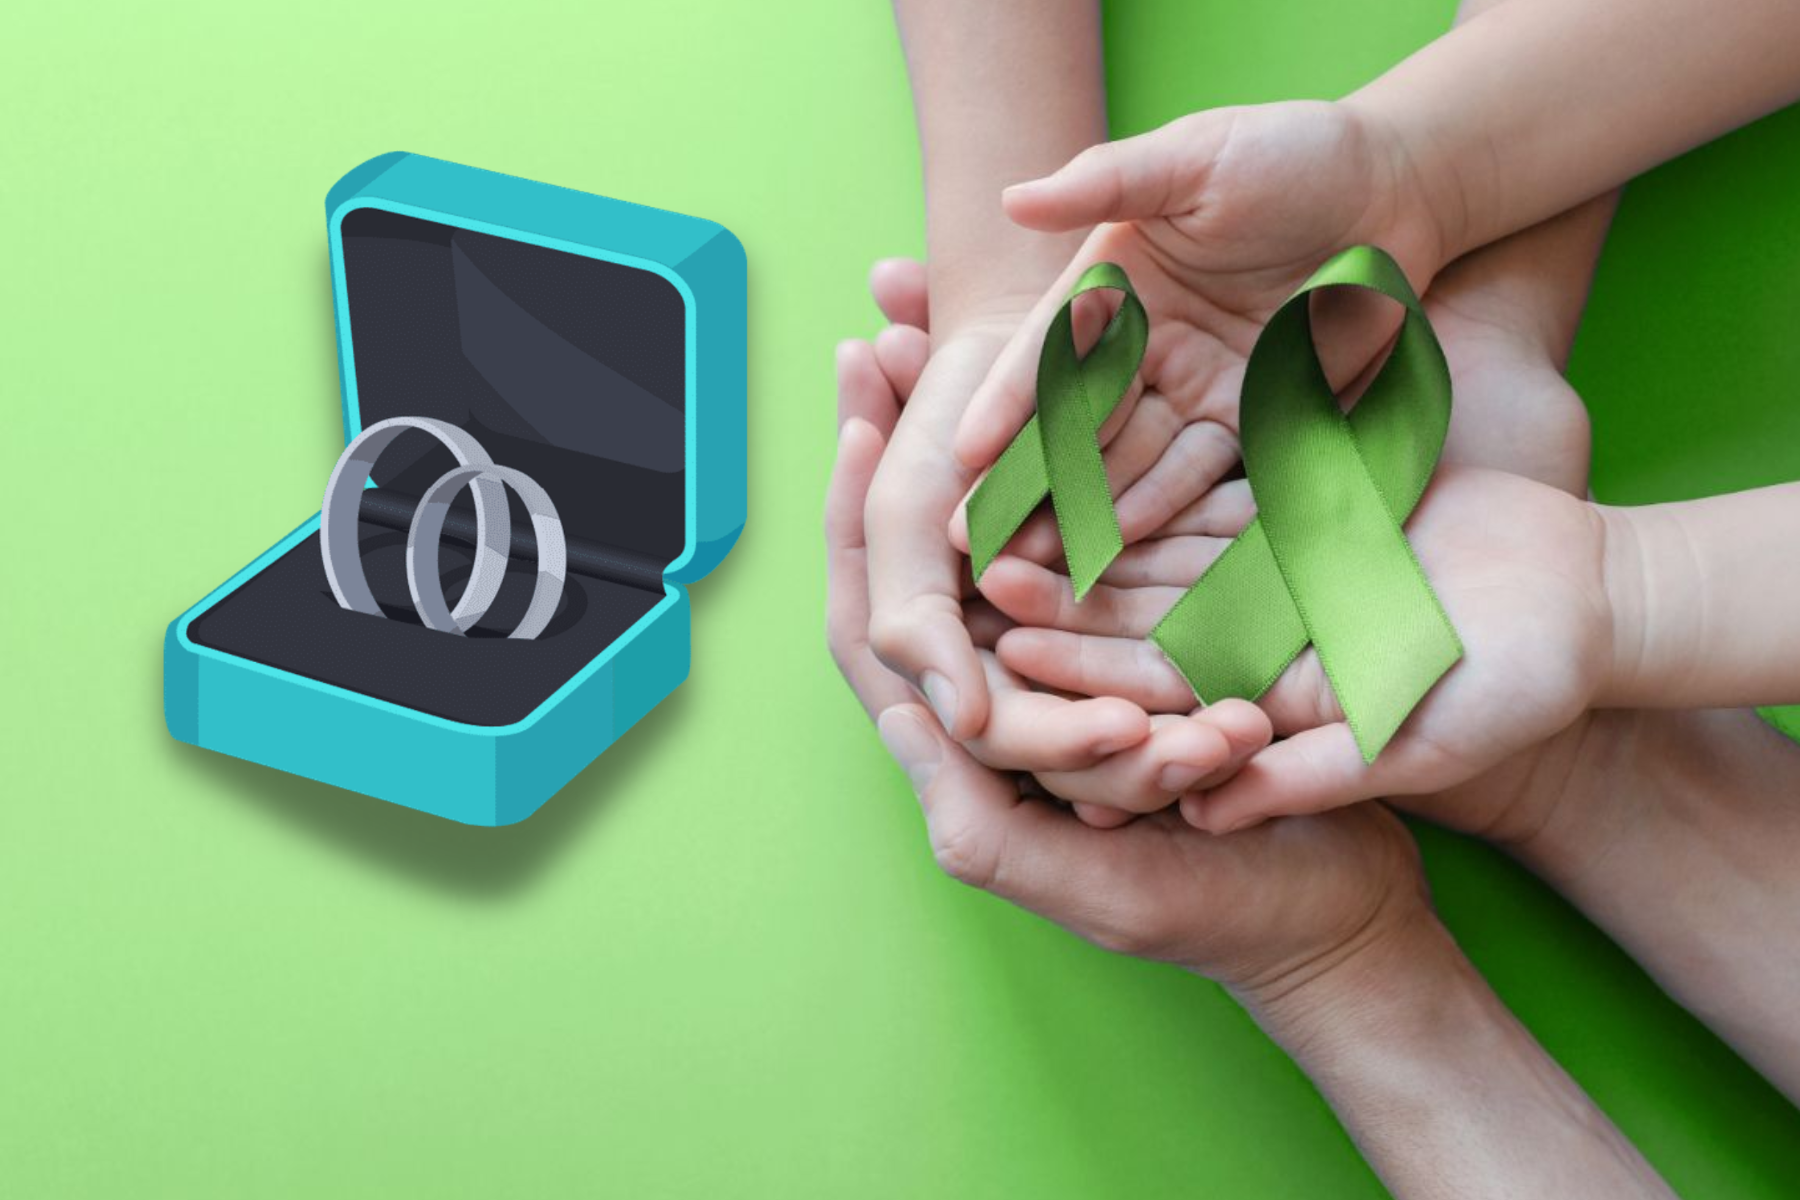 A family member's hand holding a green ribbon next to two platinum rings